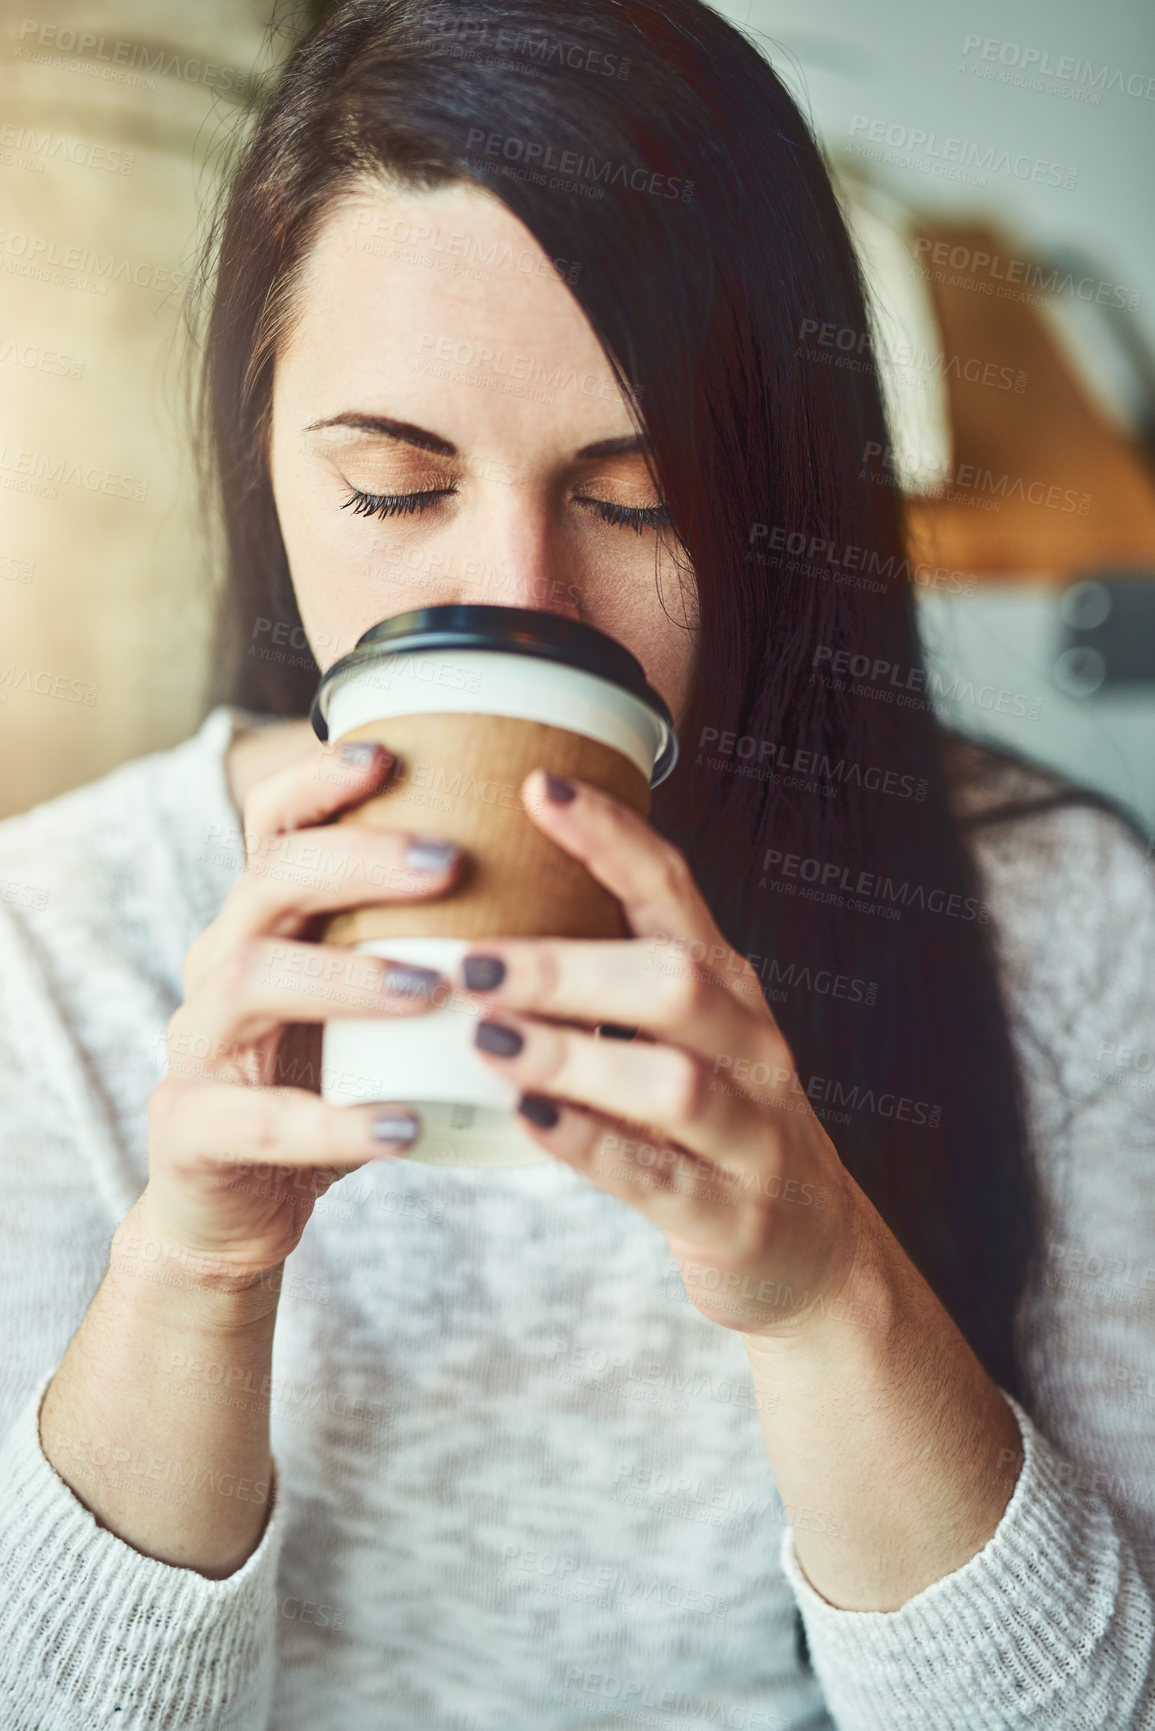 Buy stock photo Shot of a young woman drinking coffee in a cafe